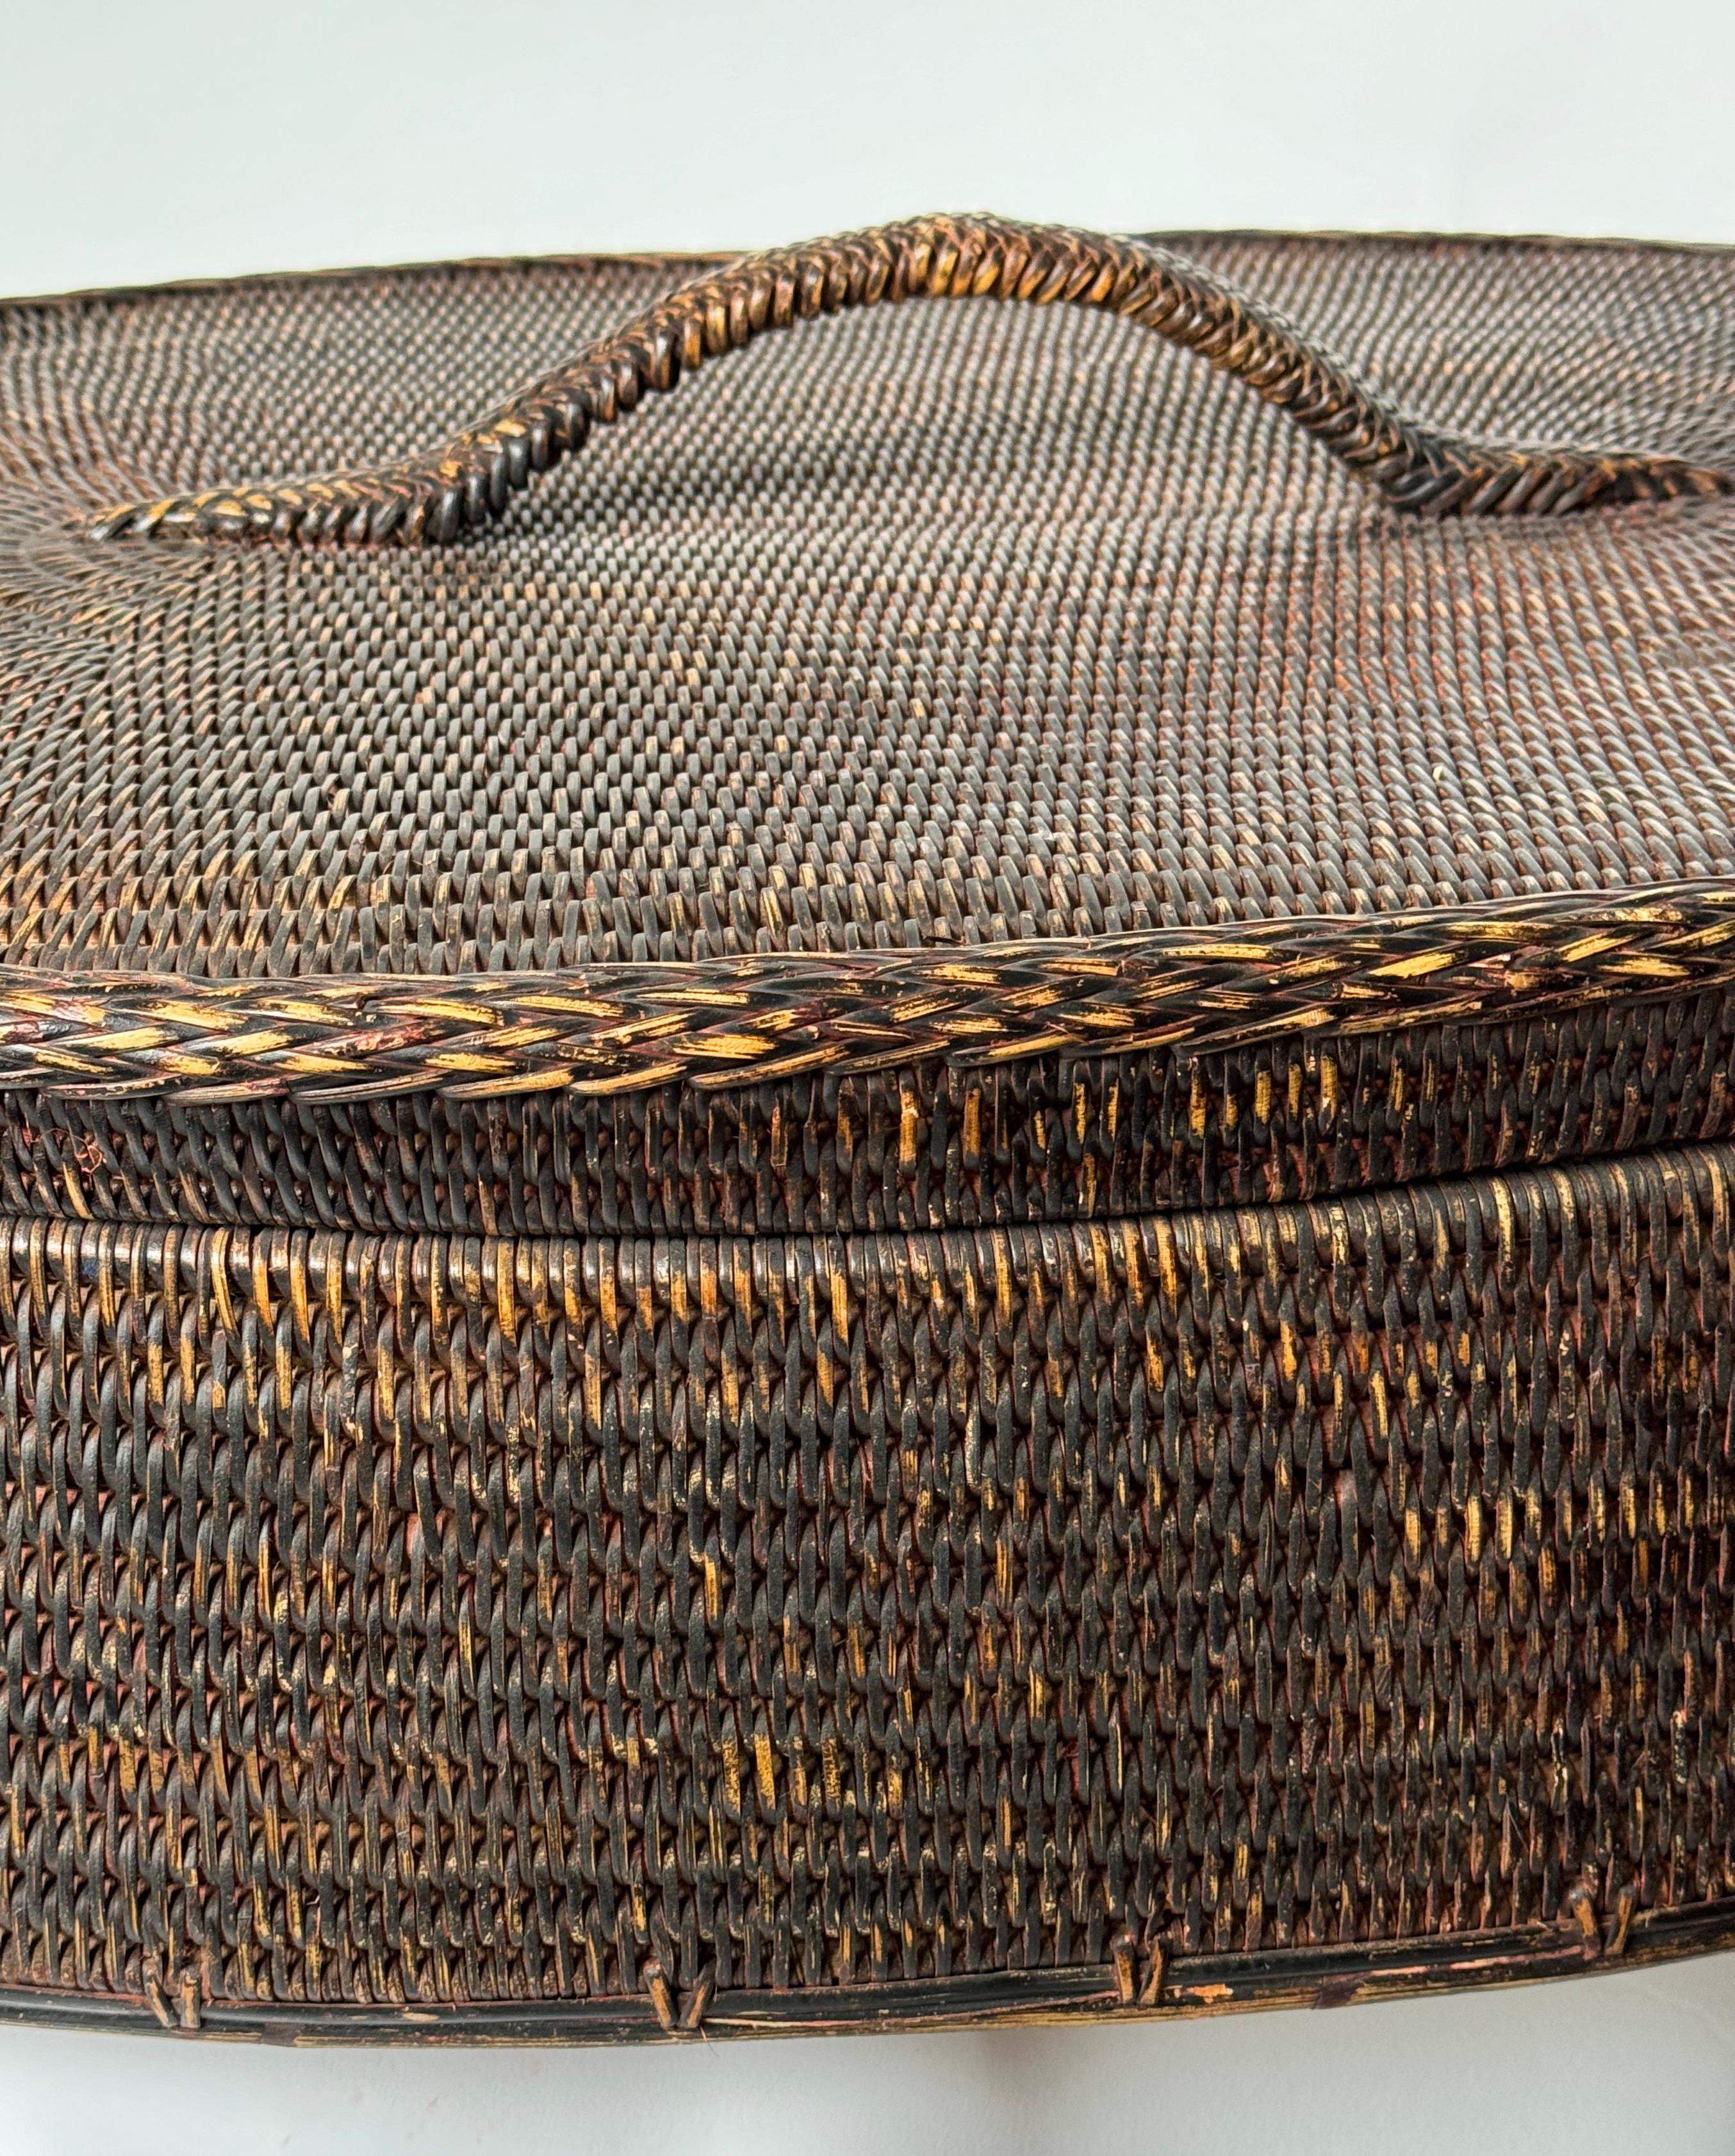 Hand-Crafted Decorative and Rustic Big Storage Basket in Rattan and Wood With Lid.   For Sale